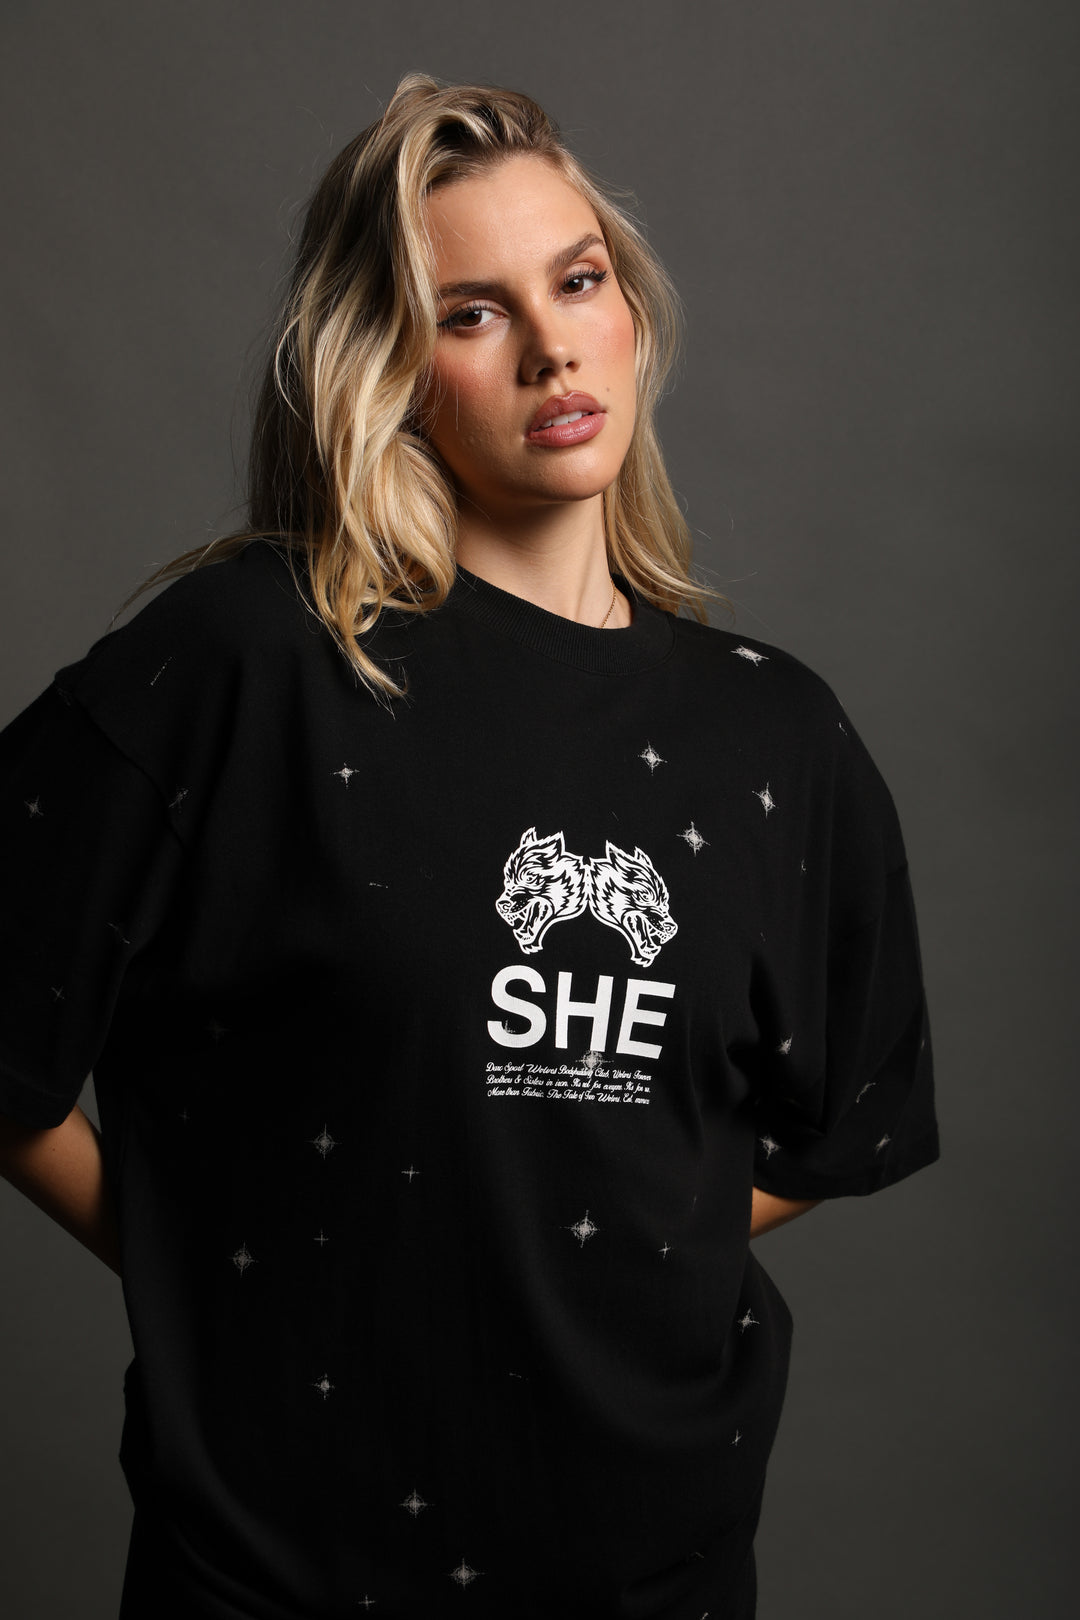 She's Gritty "Pump Cover" Tee in Black/White Starry Night